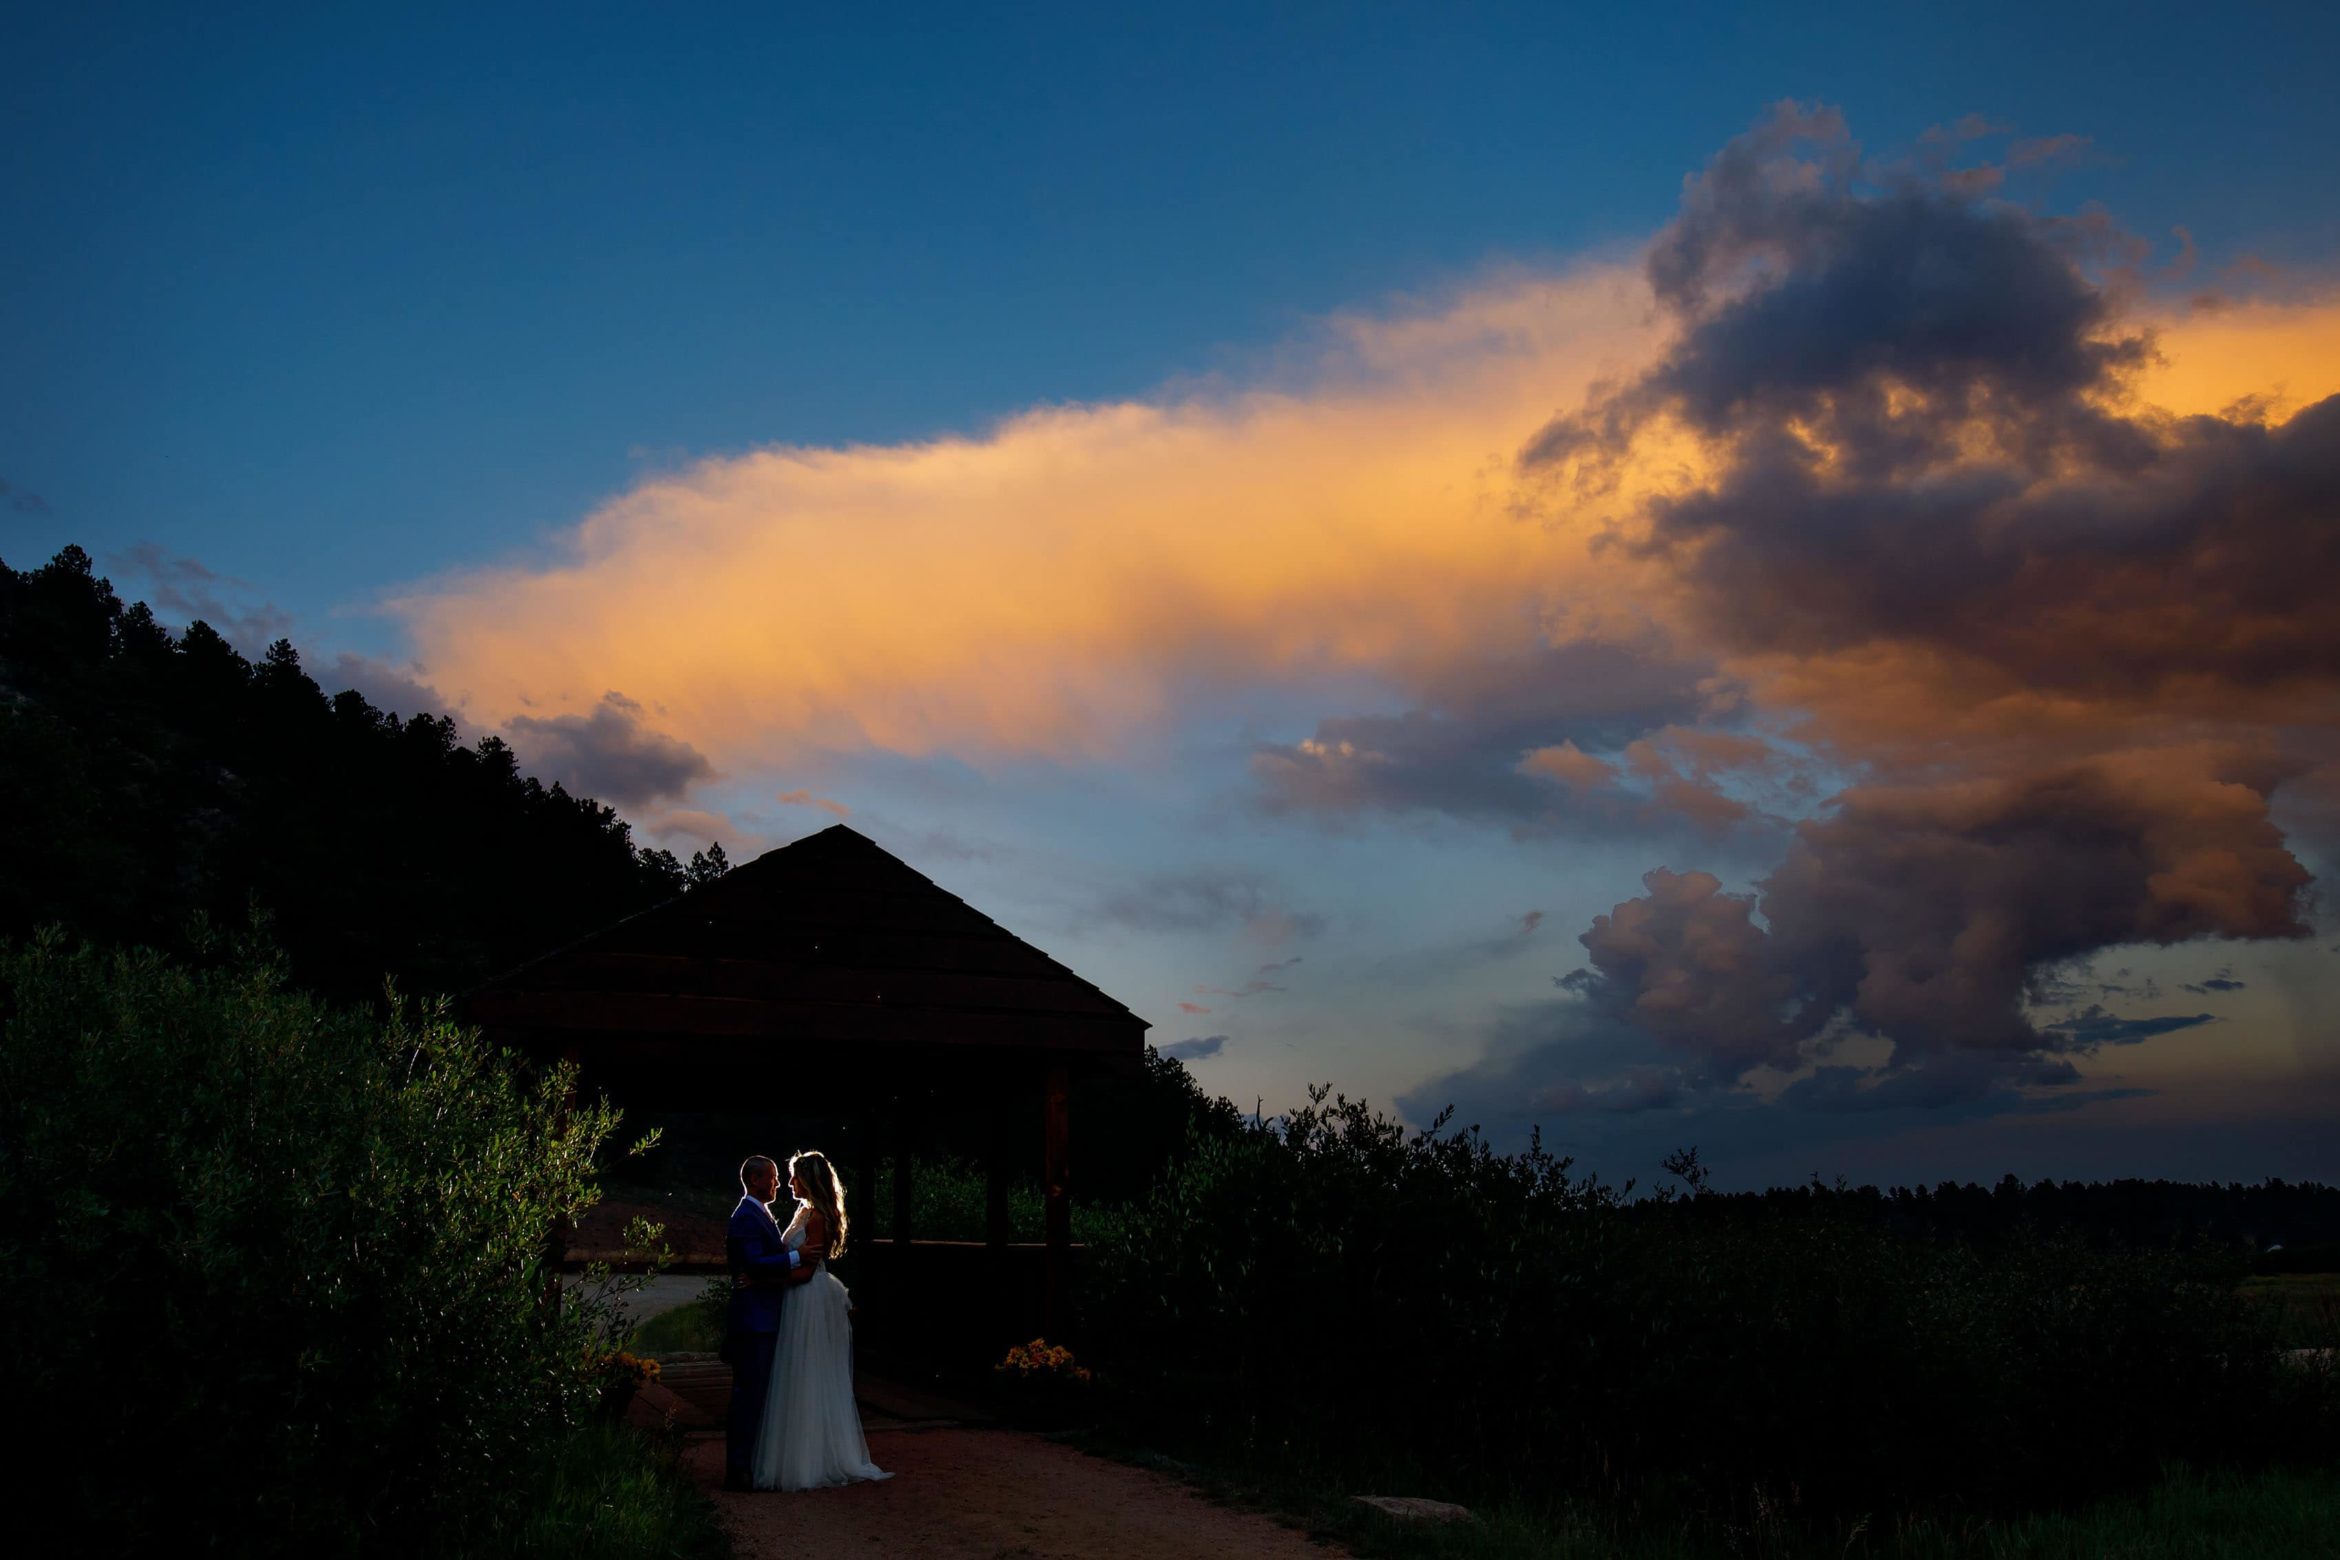 The couple are illuminated on the bridge at sunset during their summer barn wedding at Deer Creek Valley Ranch